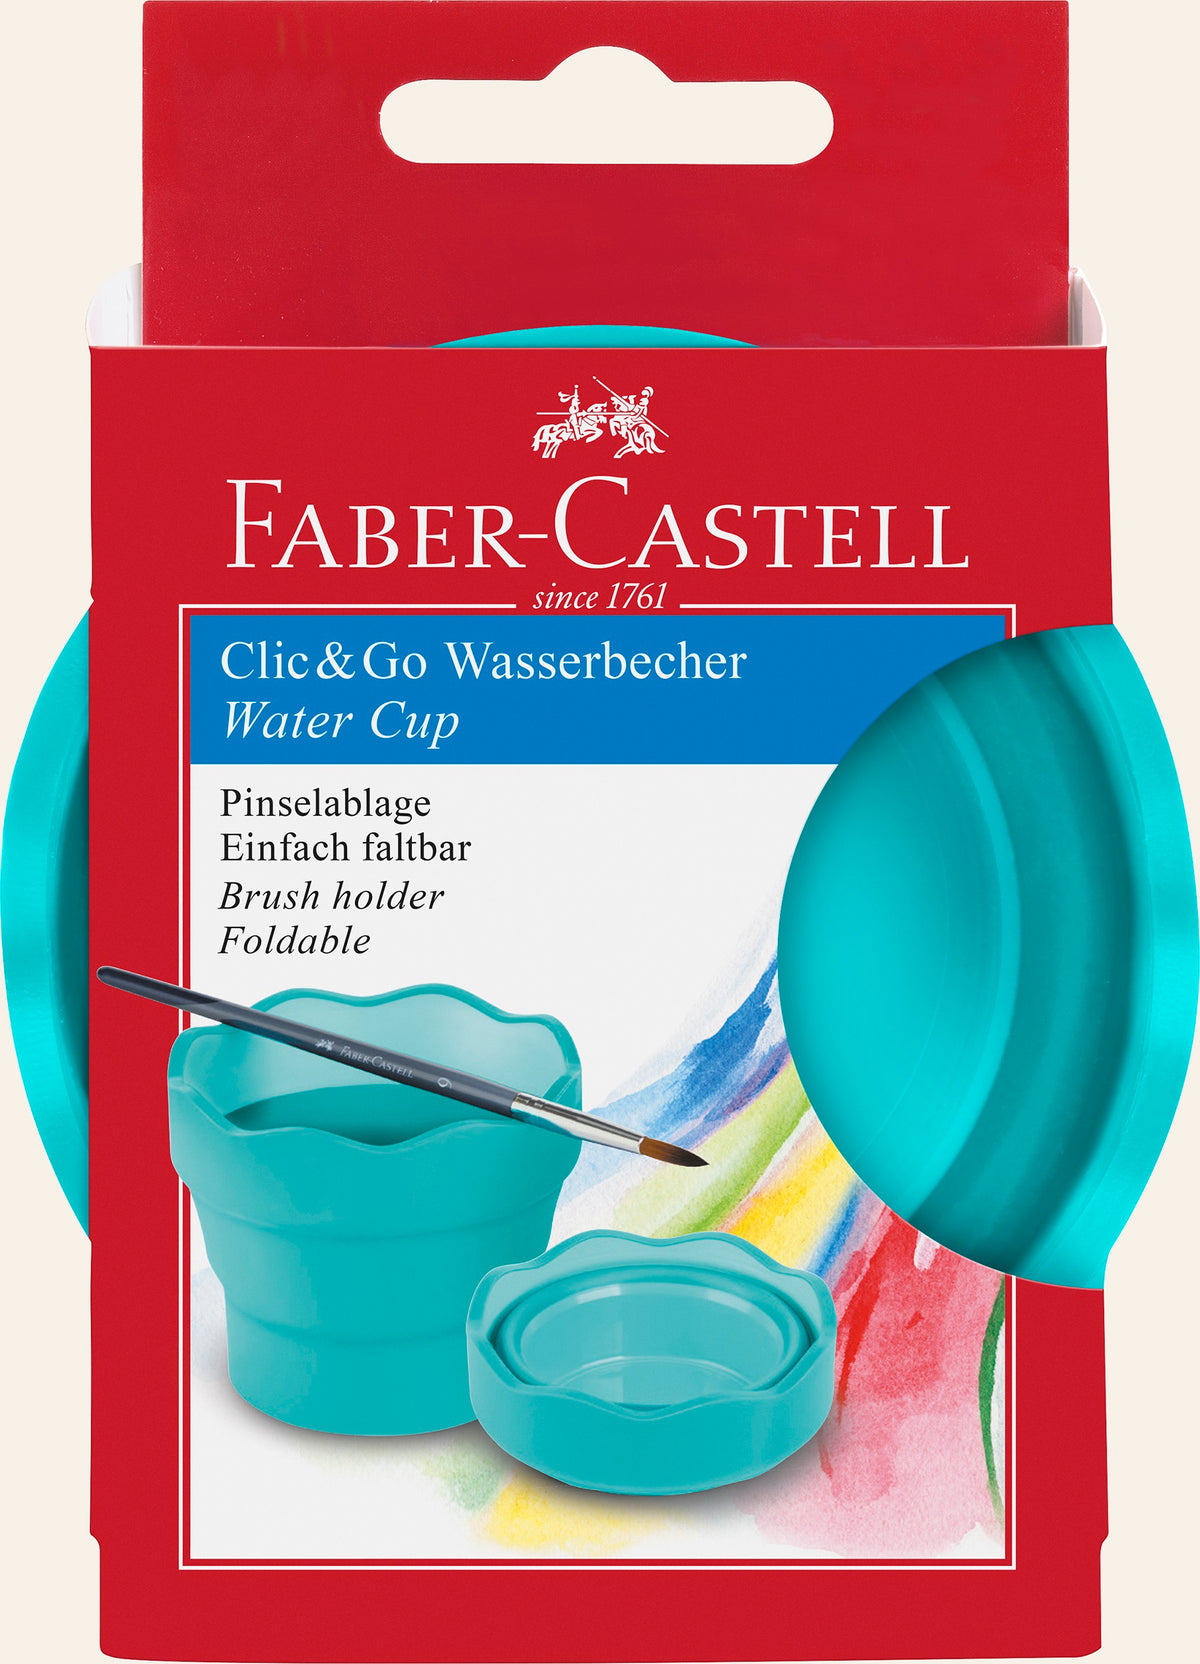 Retail packaging for the Faber Castell Clic&amp;Go painting water cup. The packaging has a red outline and shows the turquoise foldable water cup in action, with a paintbrush resting on top.